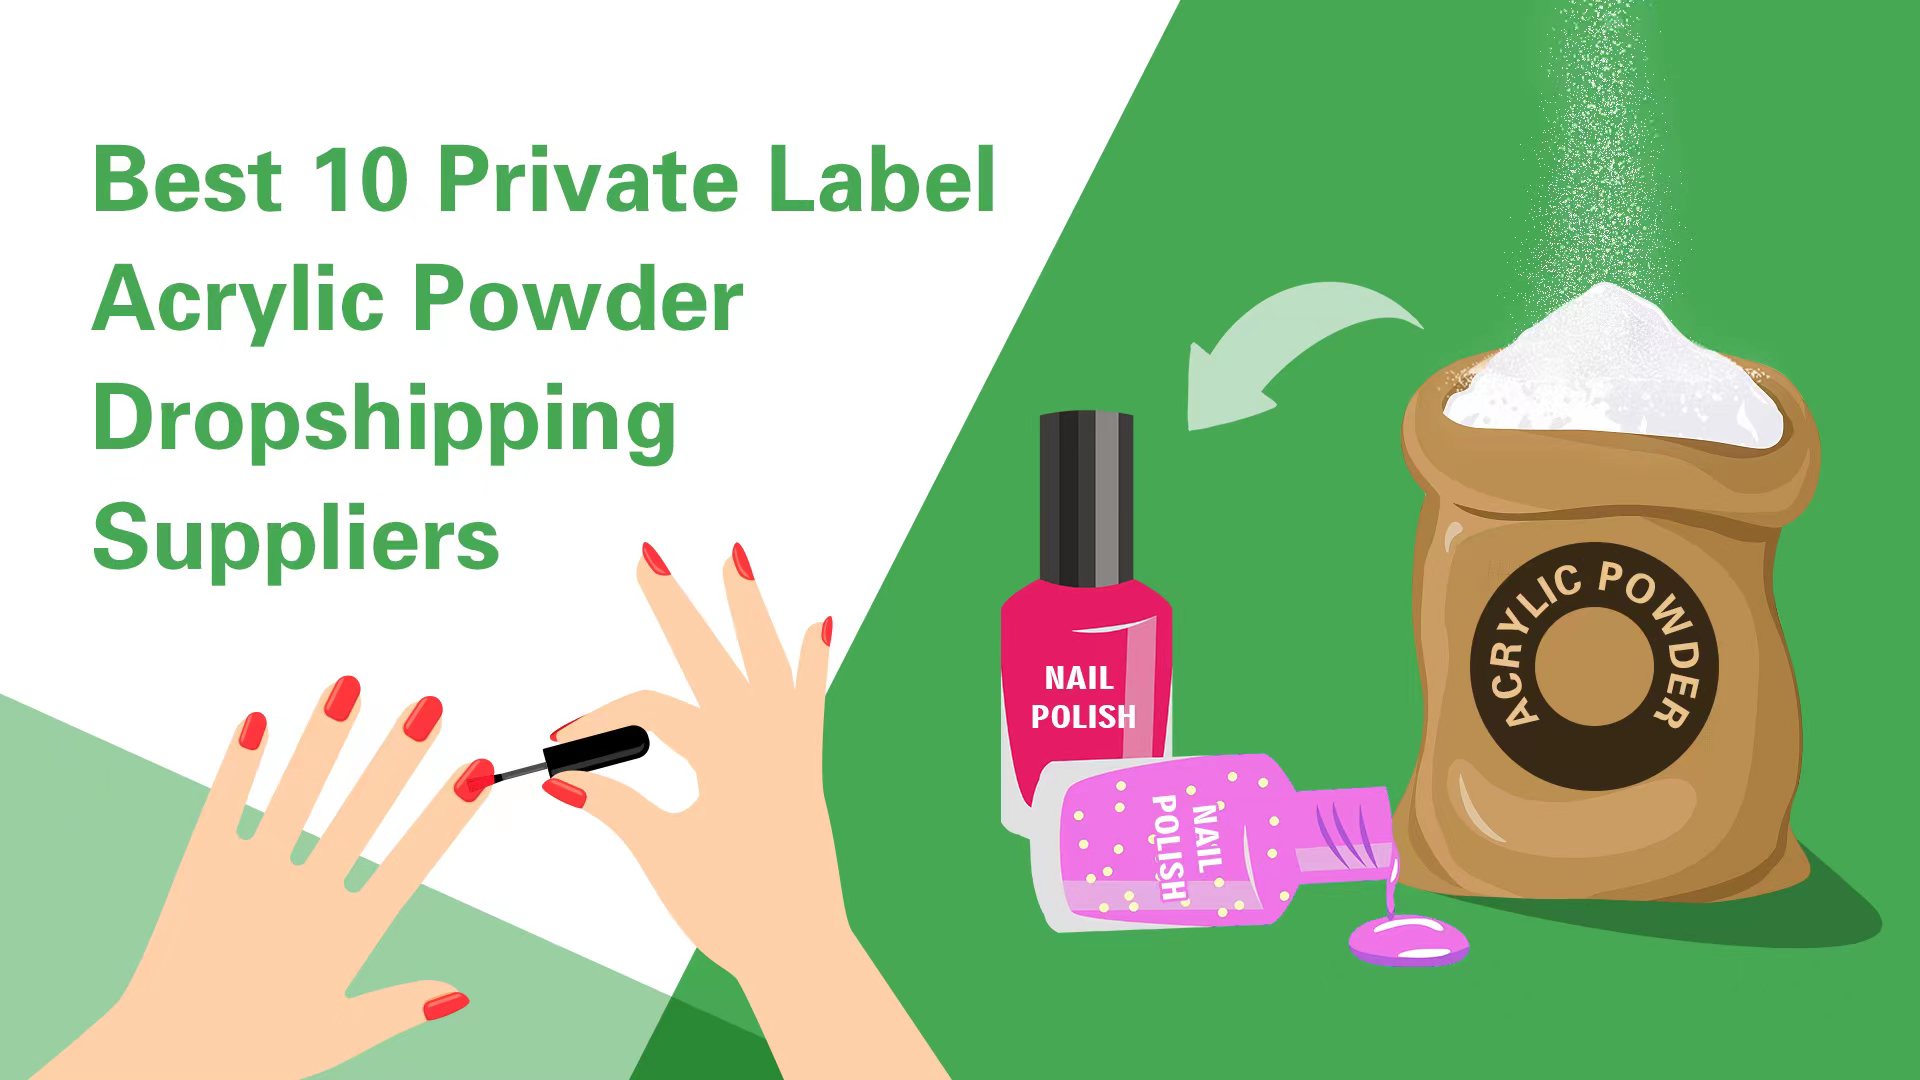 Top 10 Private Label Acrylic Powder Dropshipping Suppliers 2022